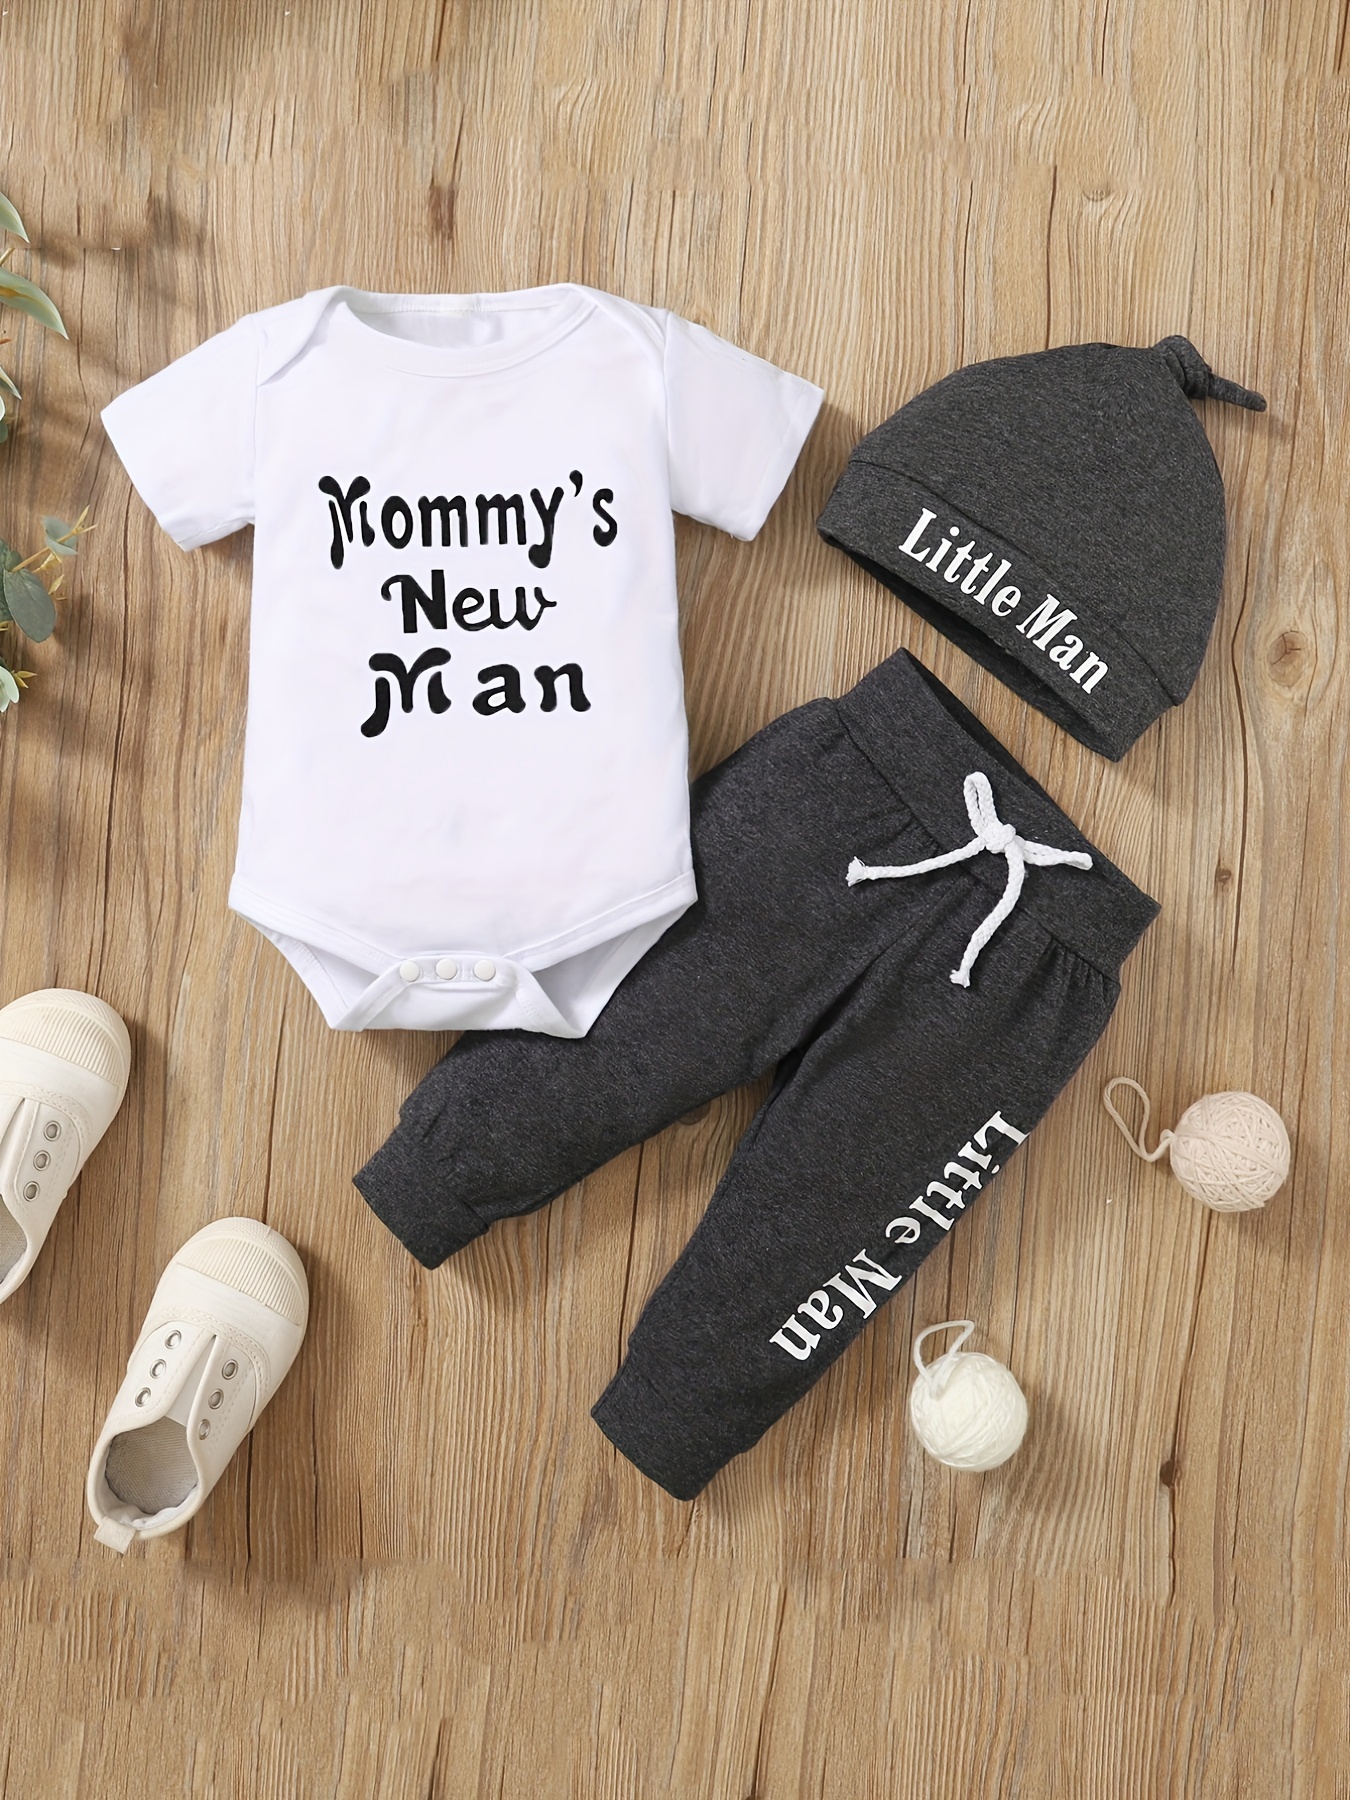 2pcs Baby's "Mommy's New Man" Print Short Sleeve Set, Cotton Bodysuit & Hat & Pants, Baby Boy's Clothing, As Gift